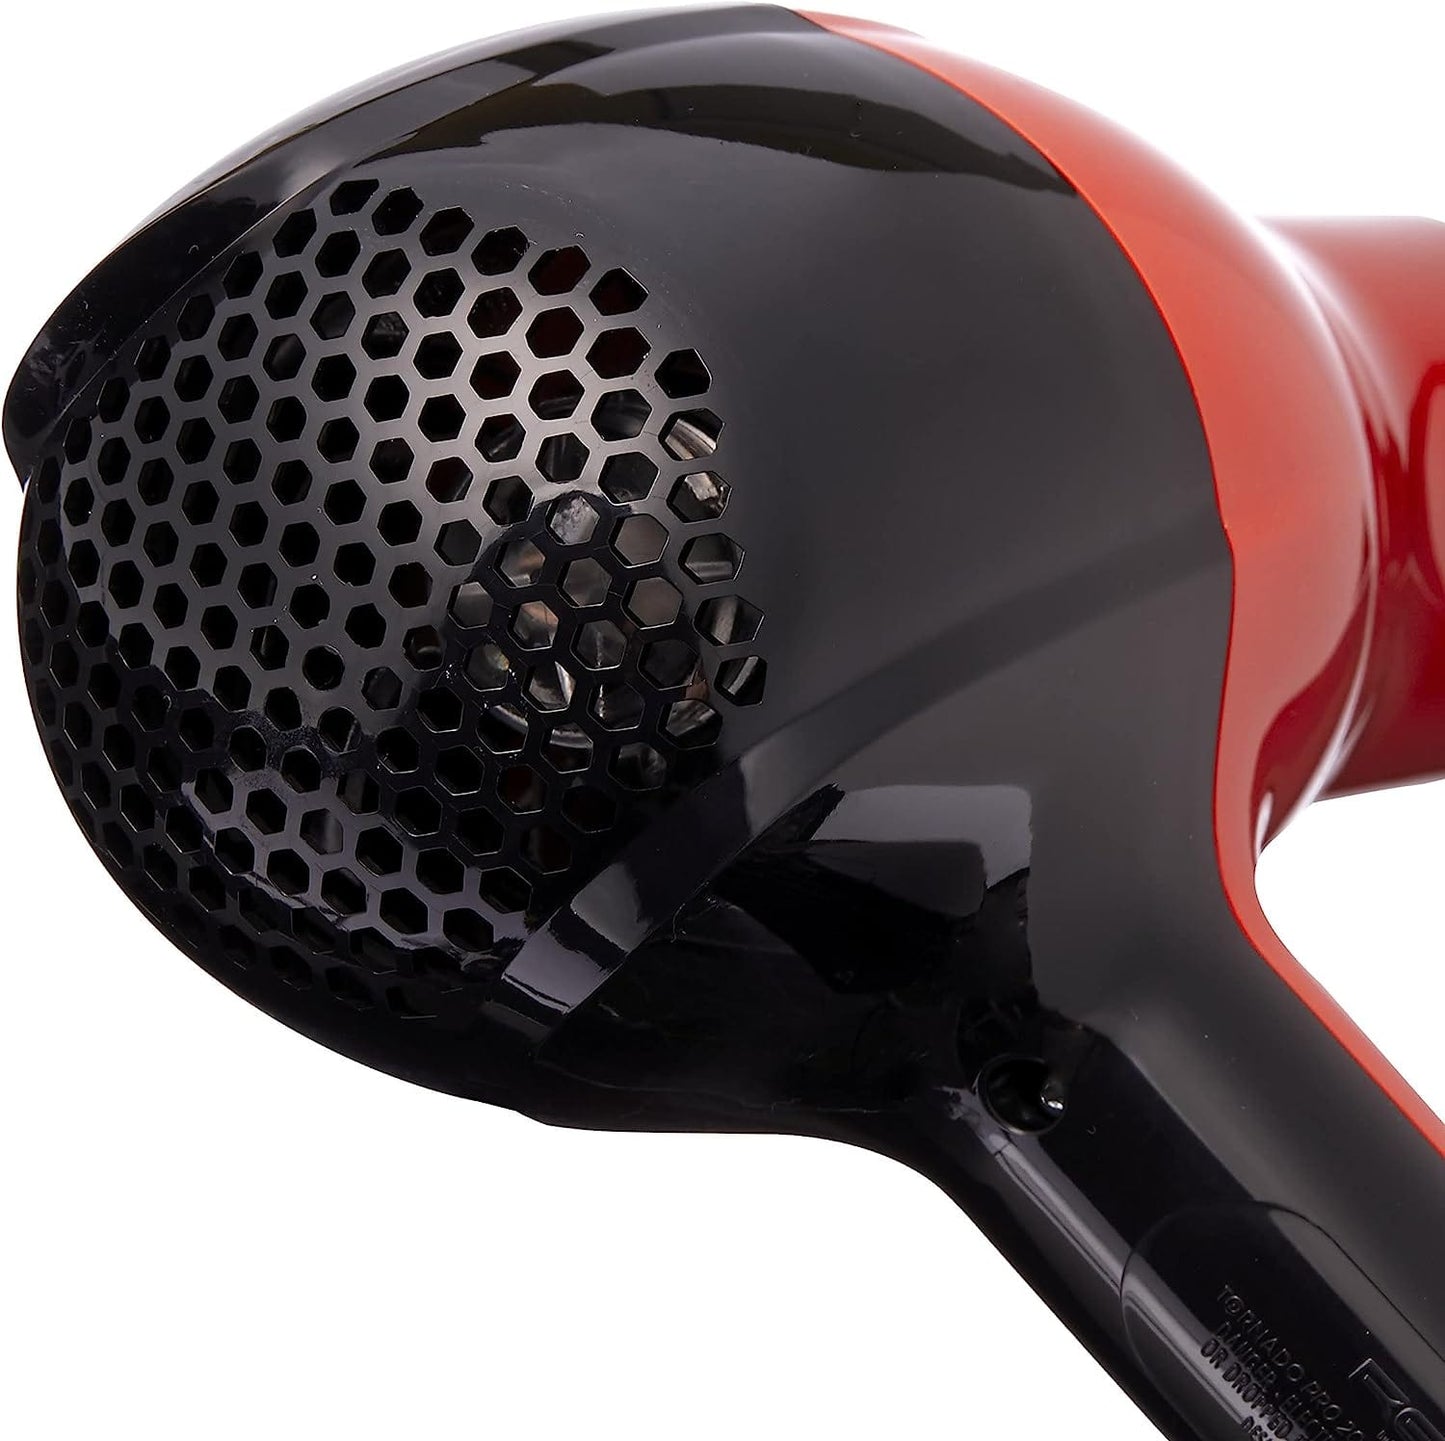 Red by Kiss Hair Dryer Tornado Pro 2000 Blow Dryer with 3 Detangler Piks